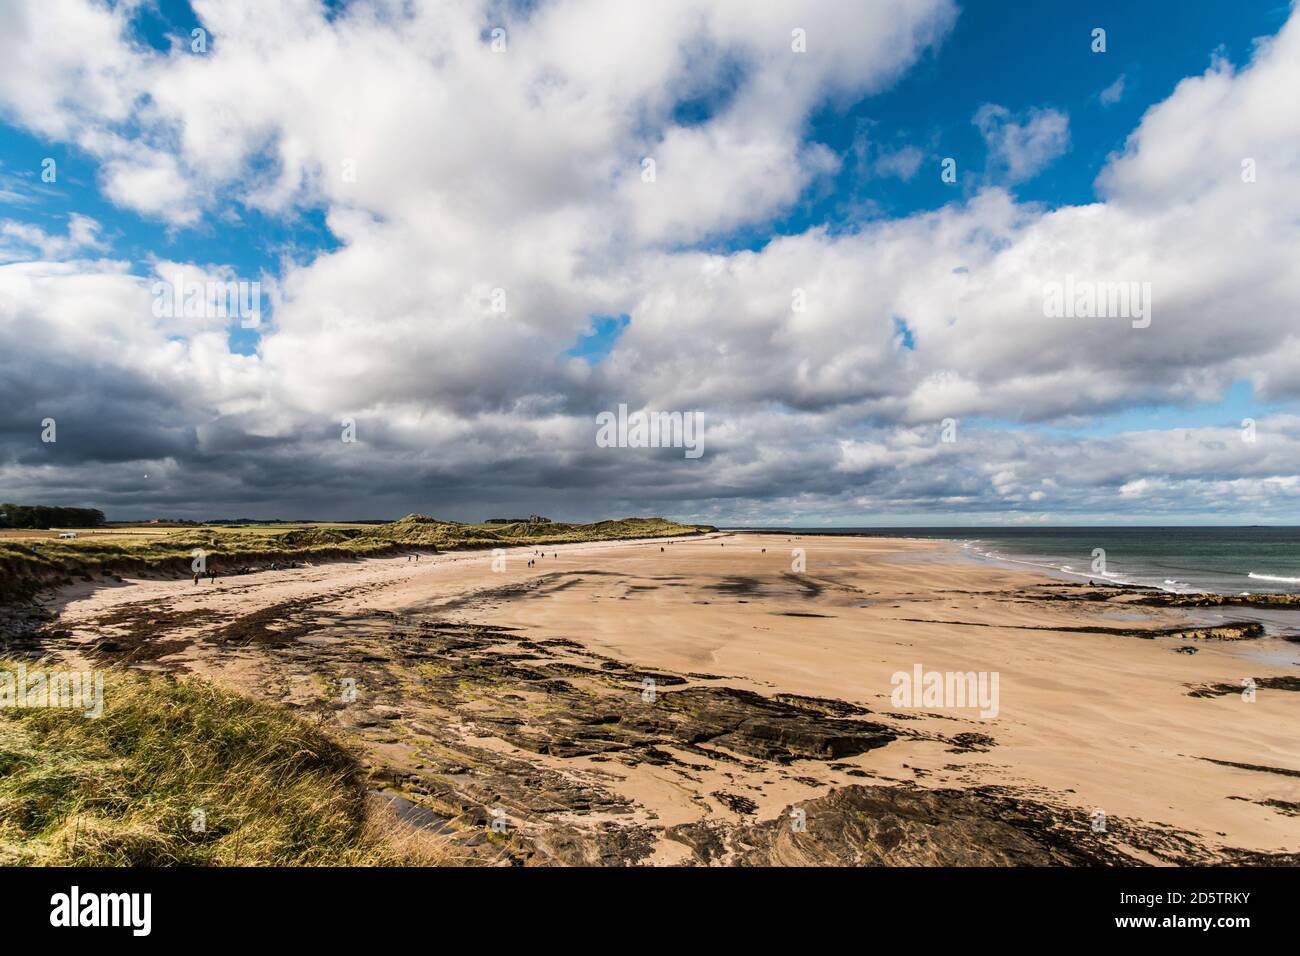 St Aidans Dunes, Seahouses, Northumberland, Bamburgh castle in the distance Stock Photo